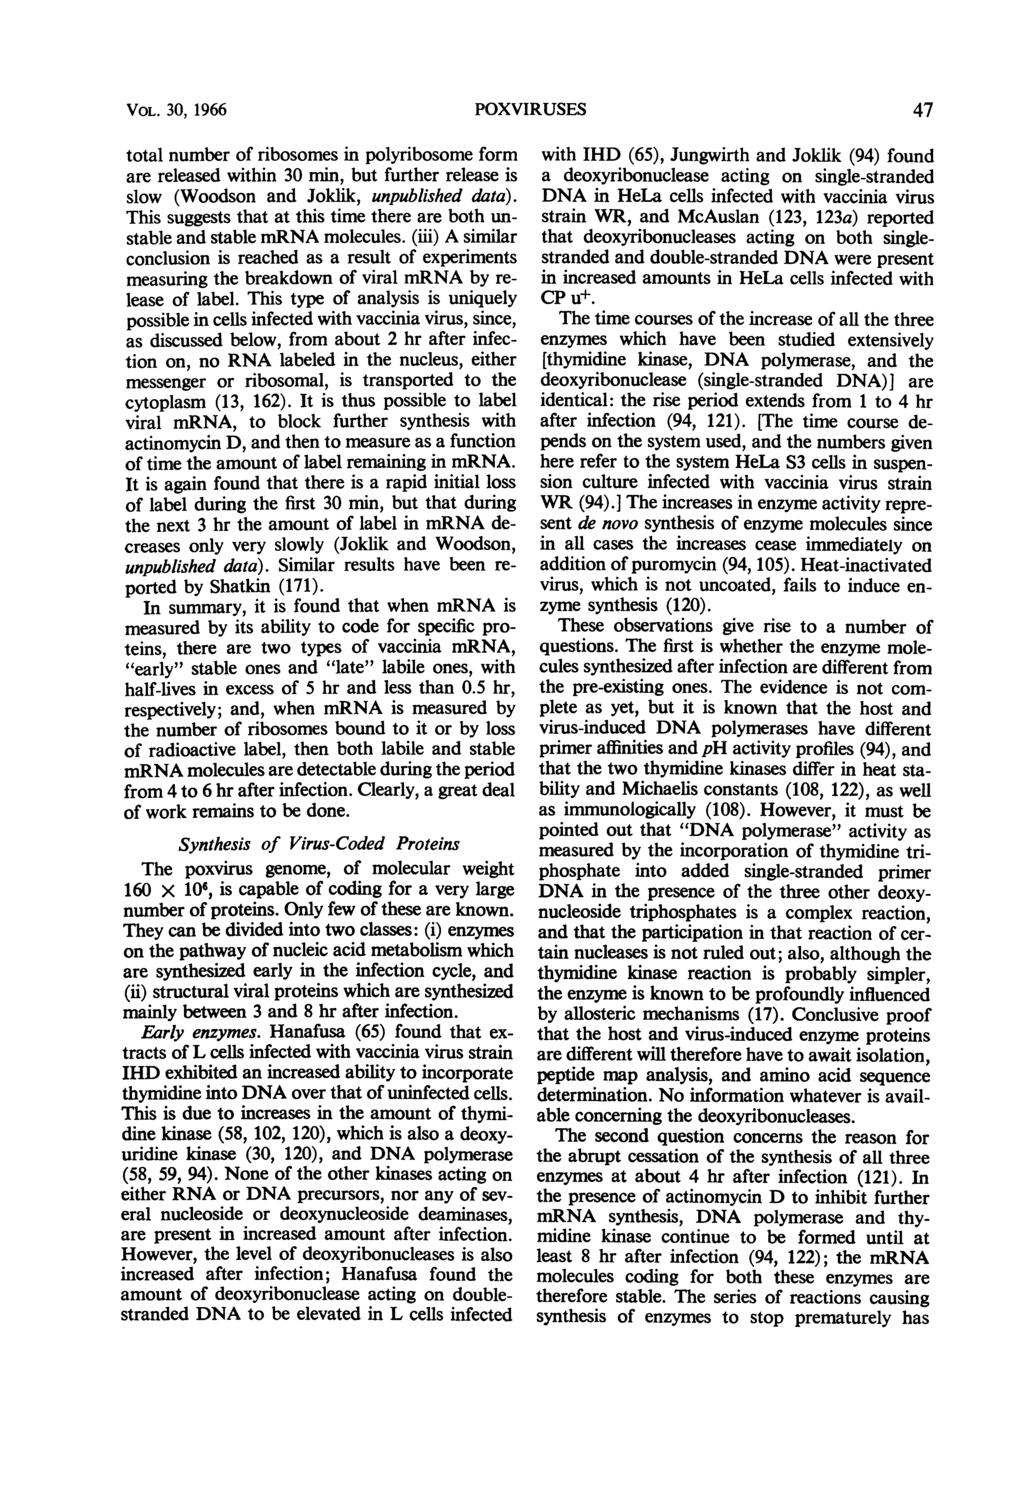 VOL. 30, 1966 POXVIRUSES 47 total number of ribosomes in polyribosome form are released within 30 min, but further release is slow (Woodson and Joklik, unpublished data).